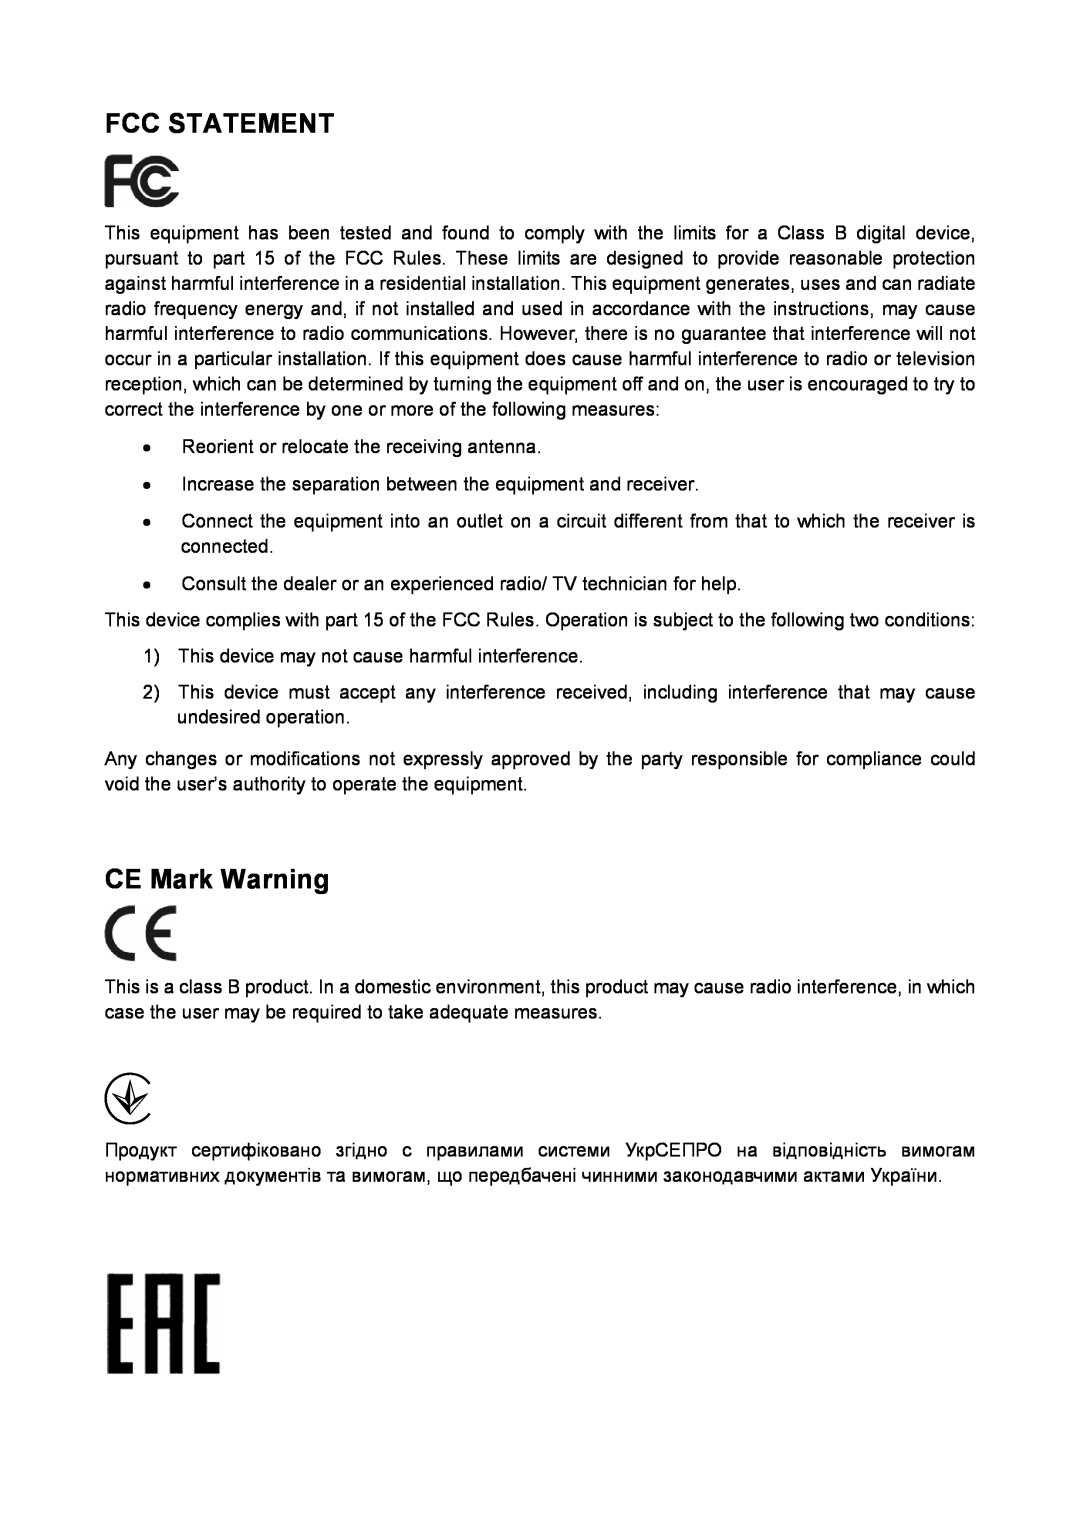 TP-Link TL-PA4020P manual Fcc Statement, CE Mark Warning 